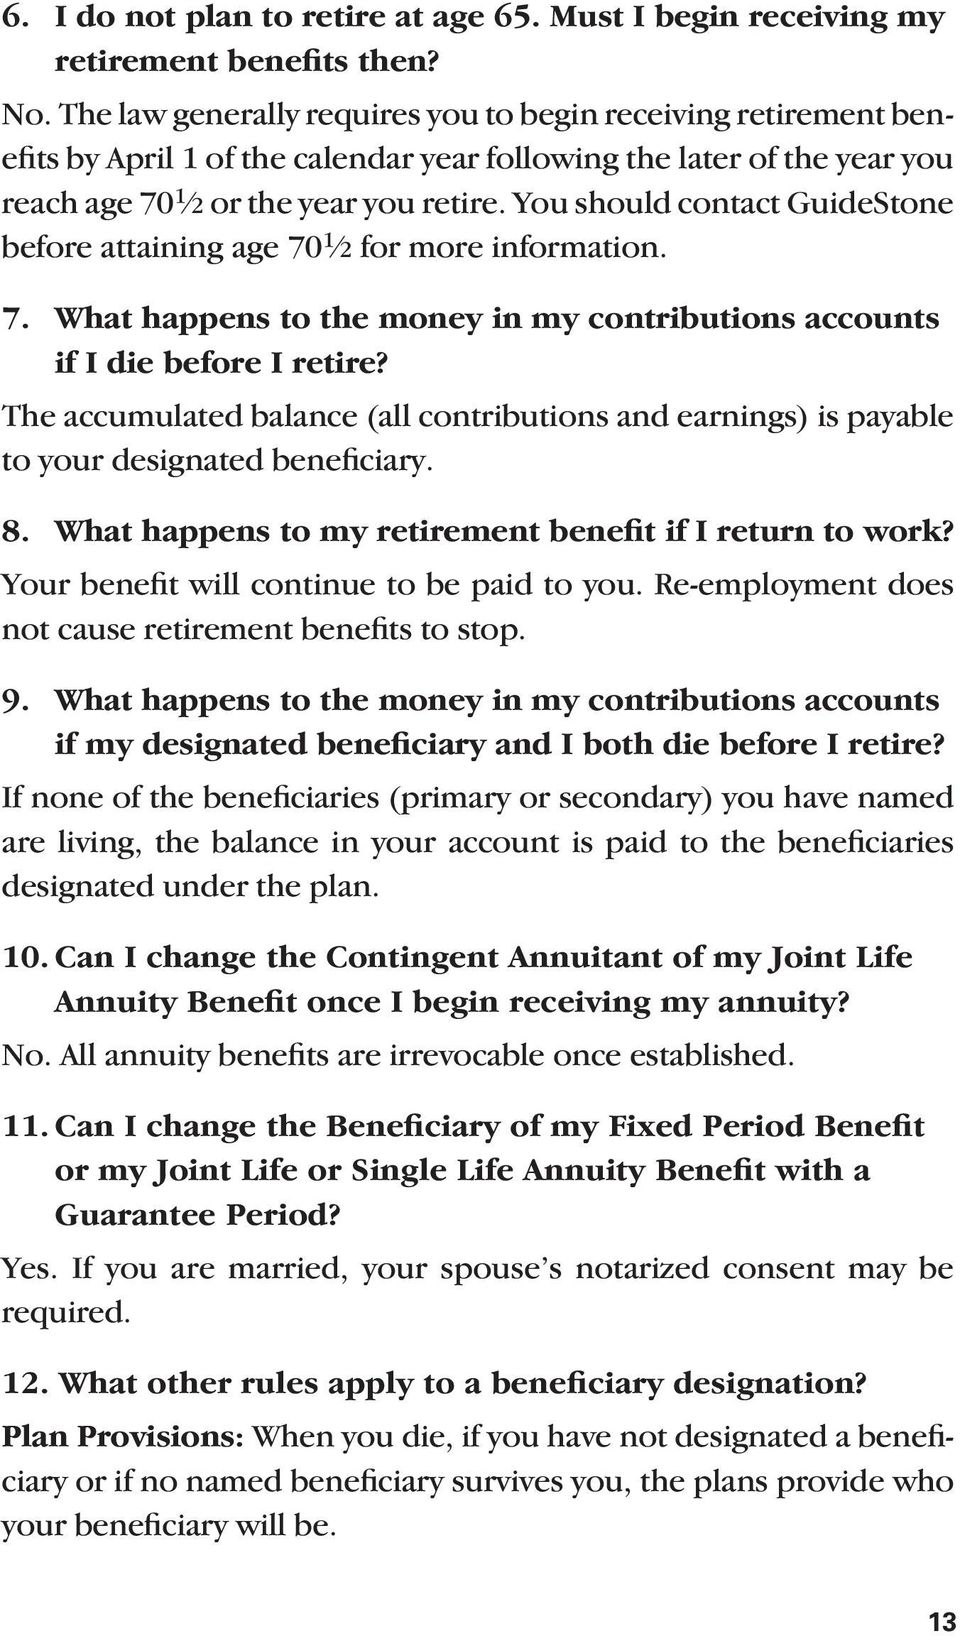 You should contact GuideStone before attaining age 70 1 2 for more information. 7. What happens to the money in my contributions accounts if I die before I retire?